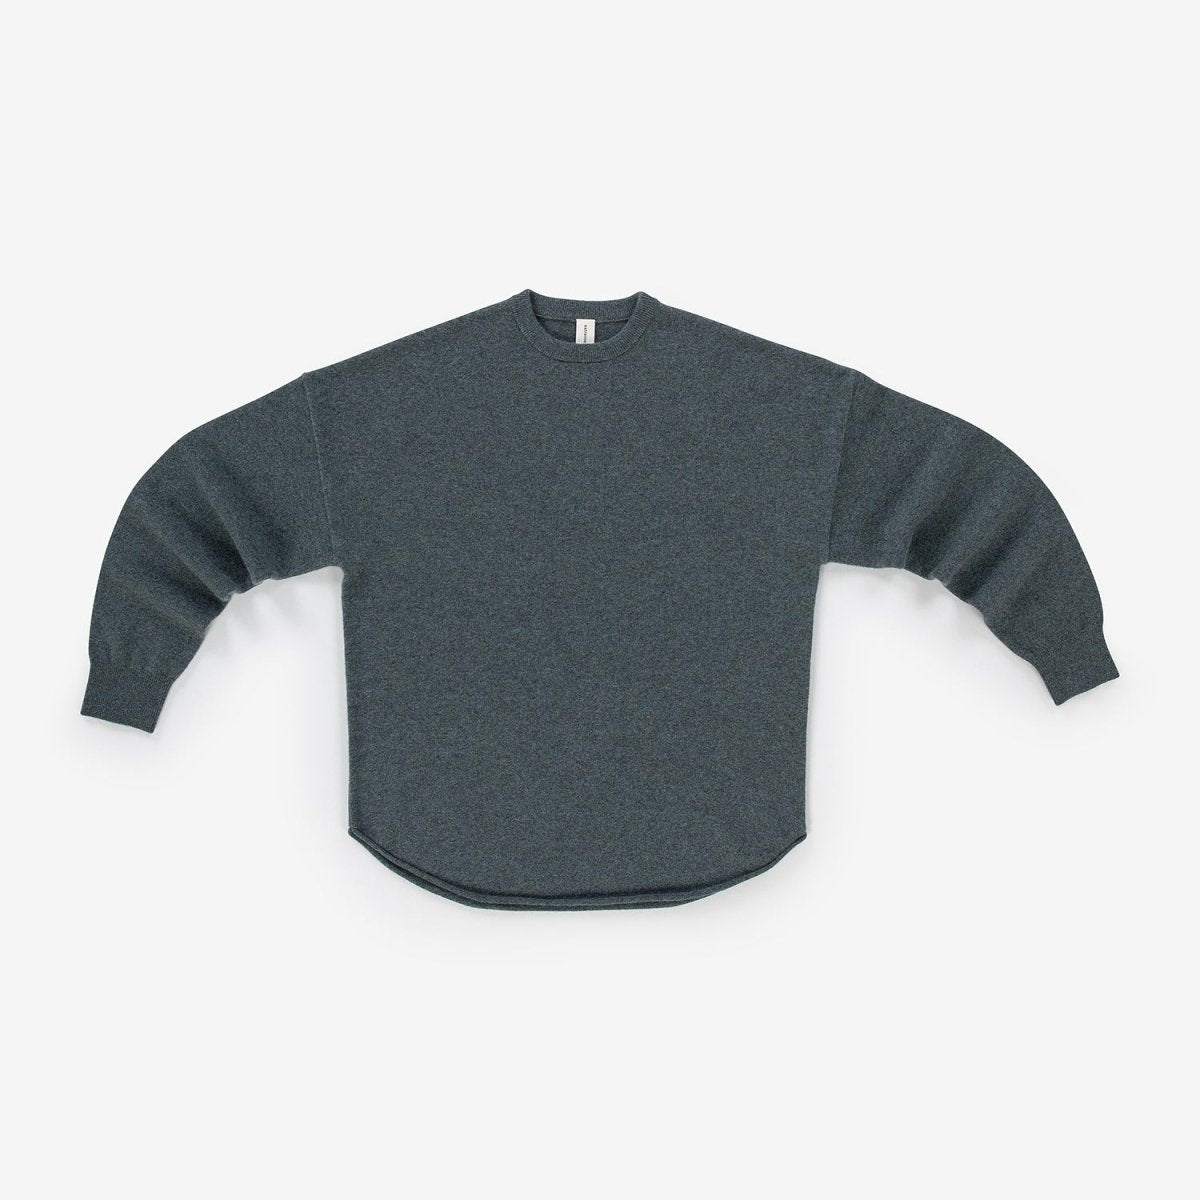 n°53 crew hop - sweaters - extreme cashmere